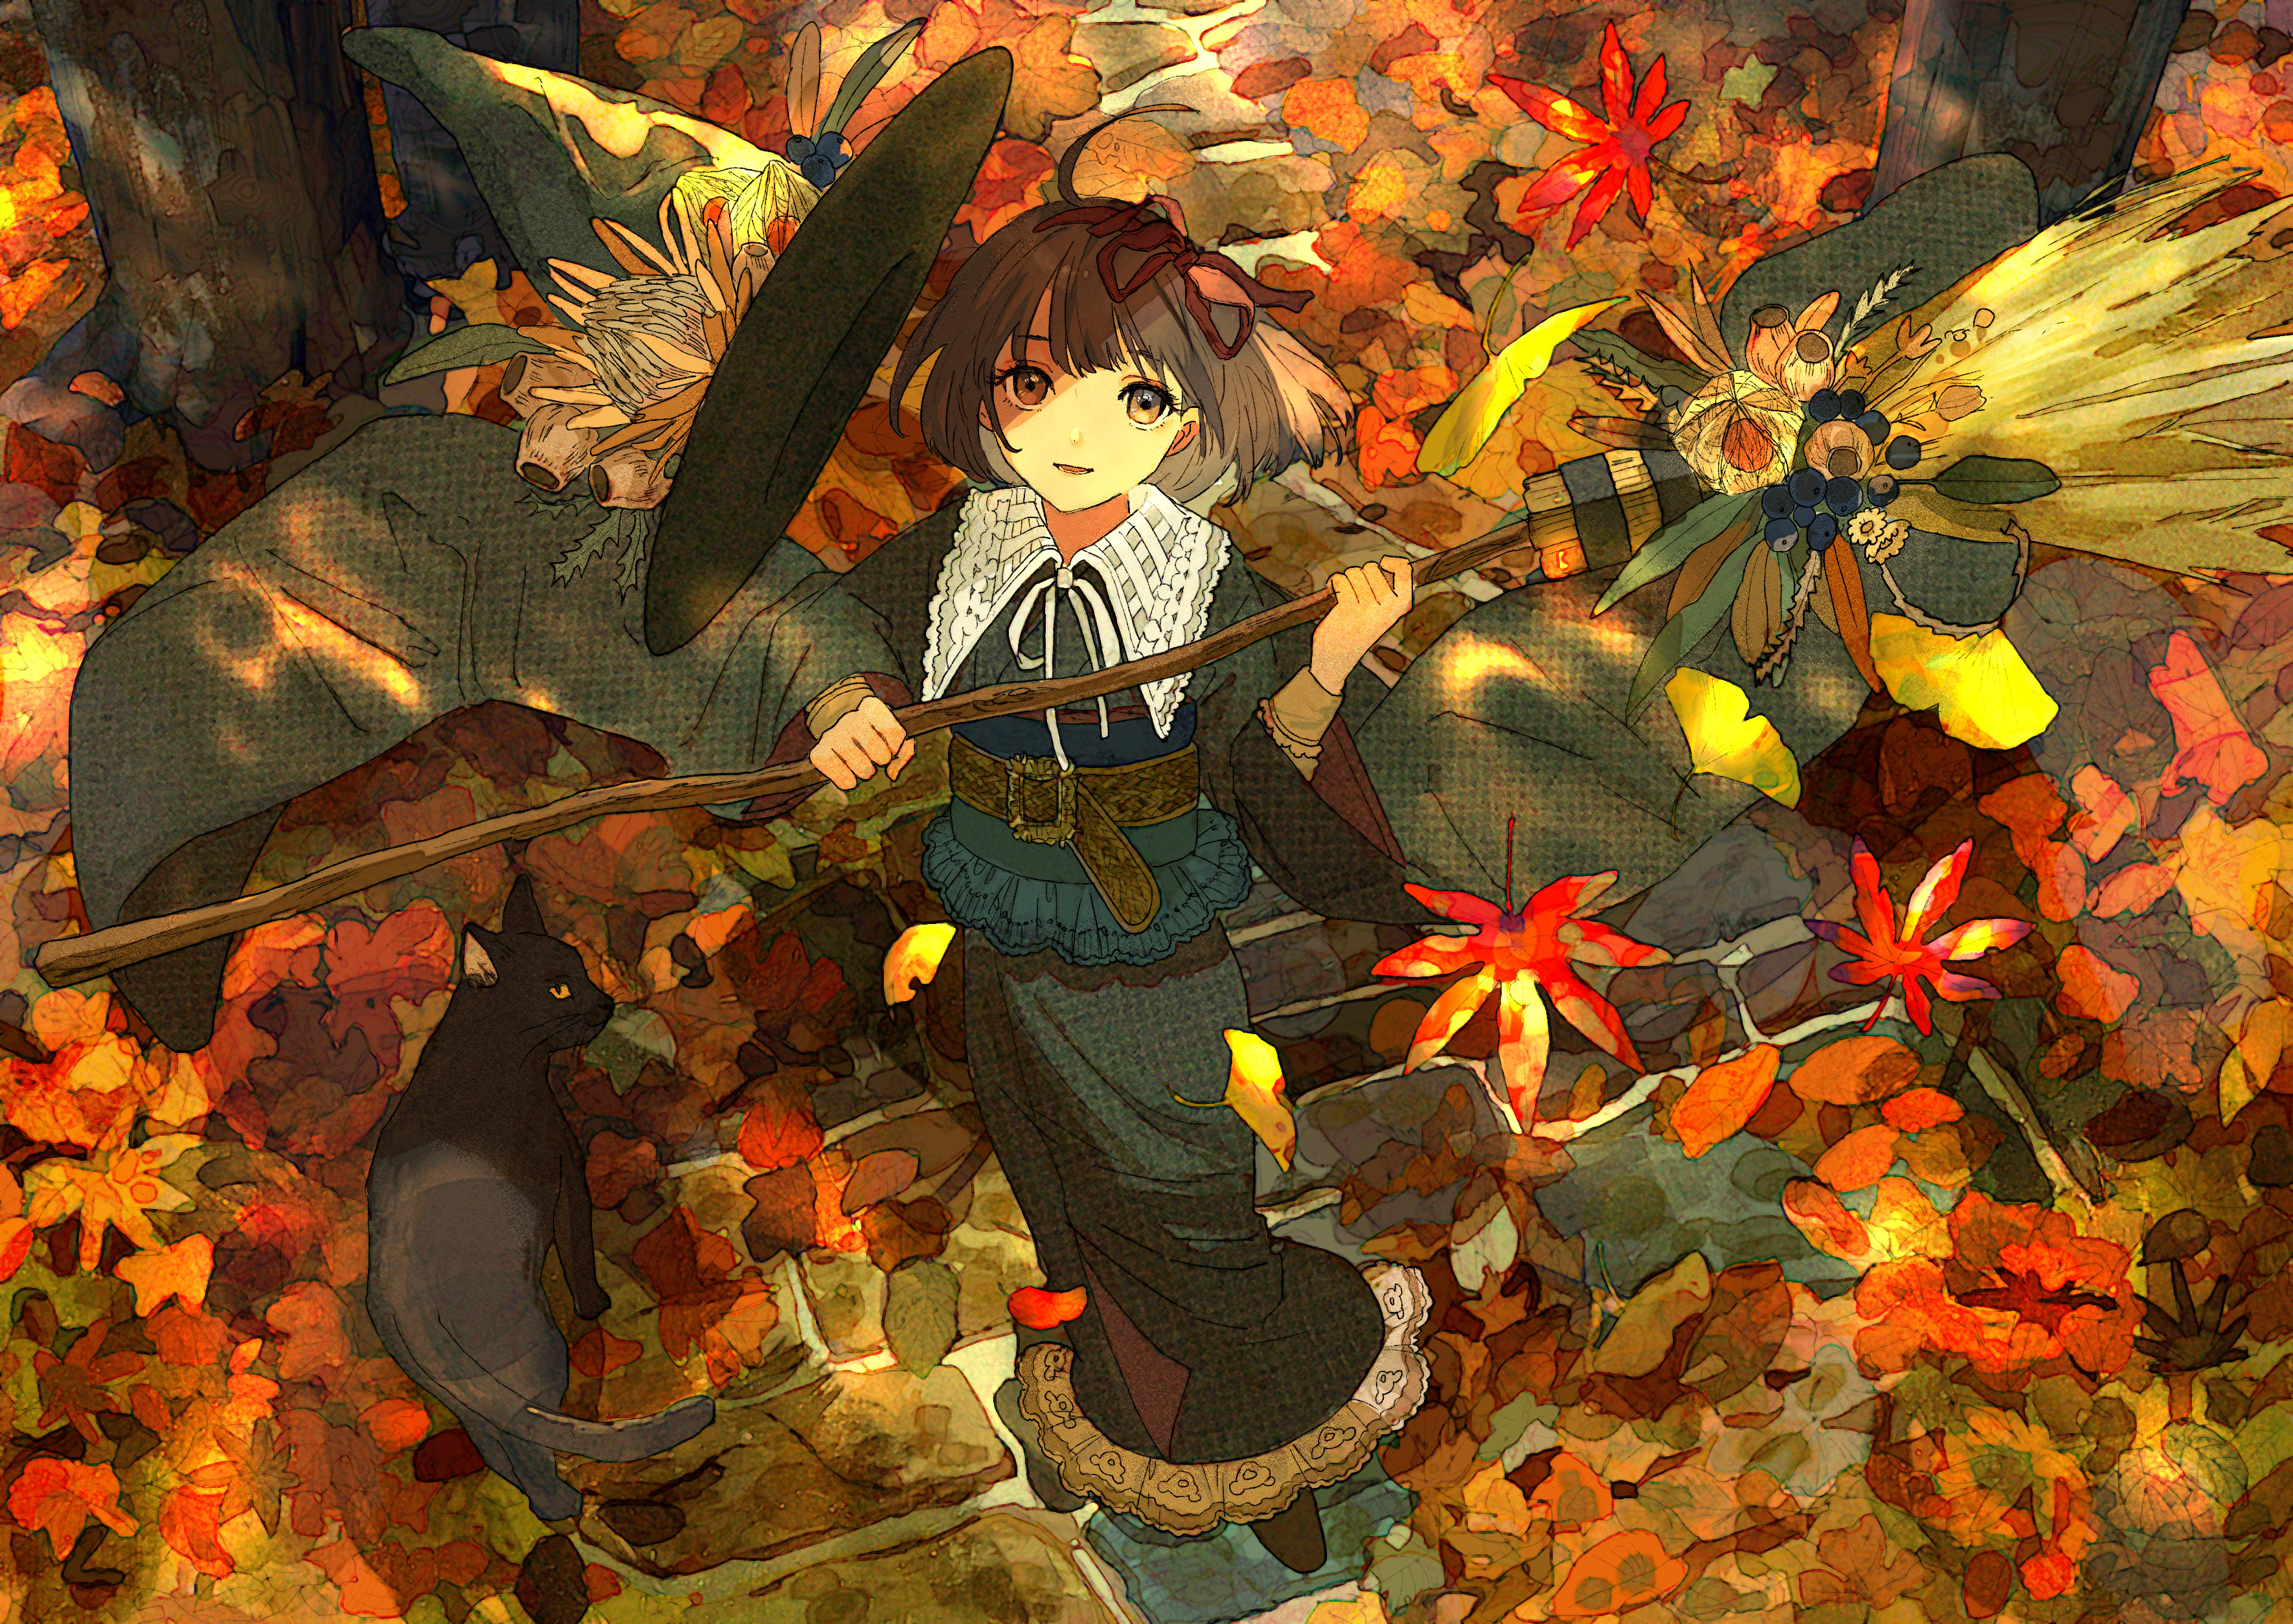 Anime Anime Girls Digital Art Artwork 2D Portrait Qooo003 Fall Cats Witch Witches Broom 3541x2508